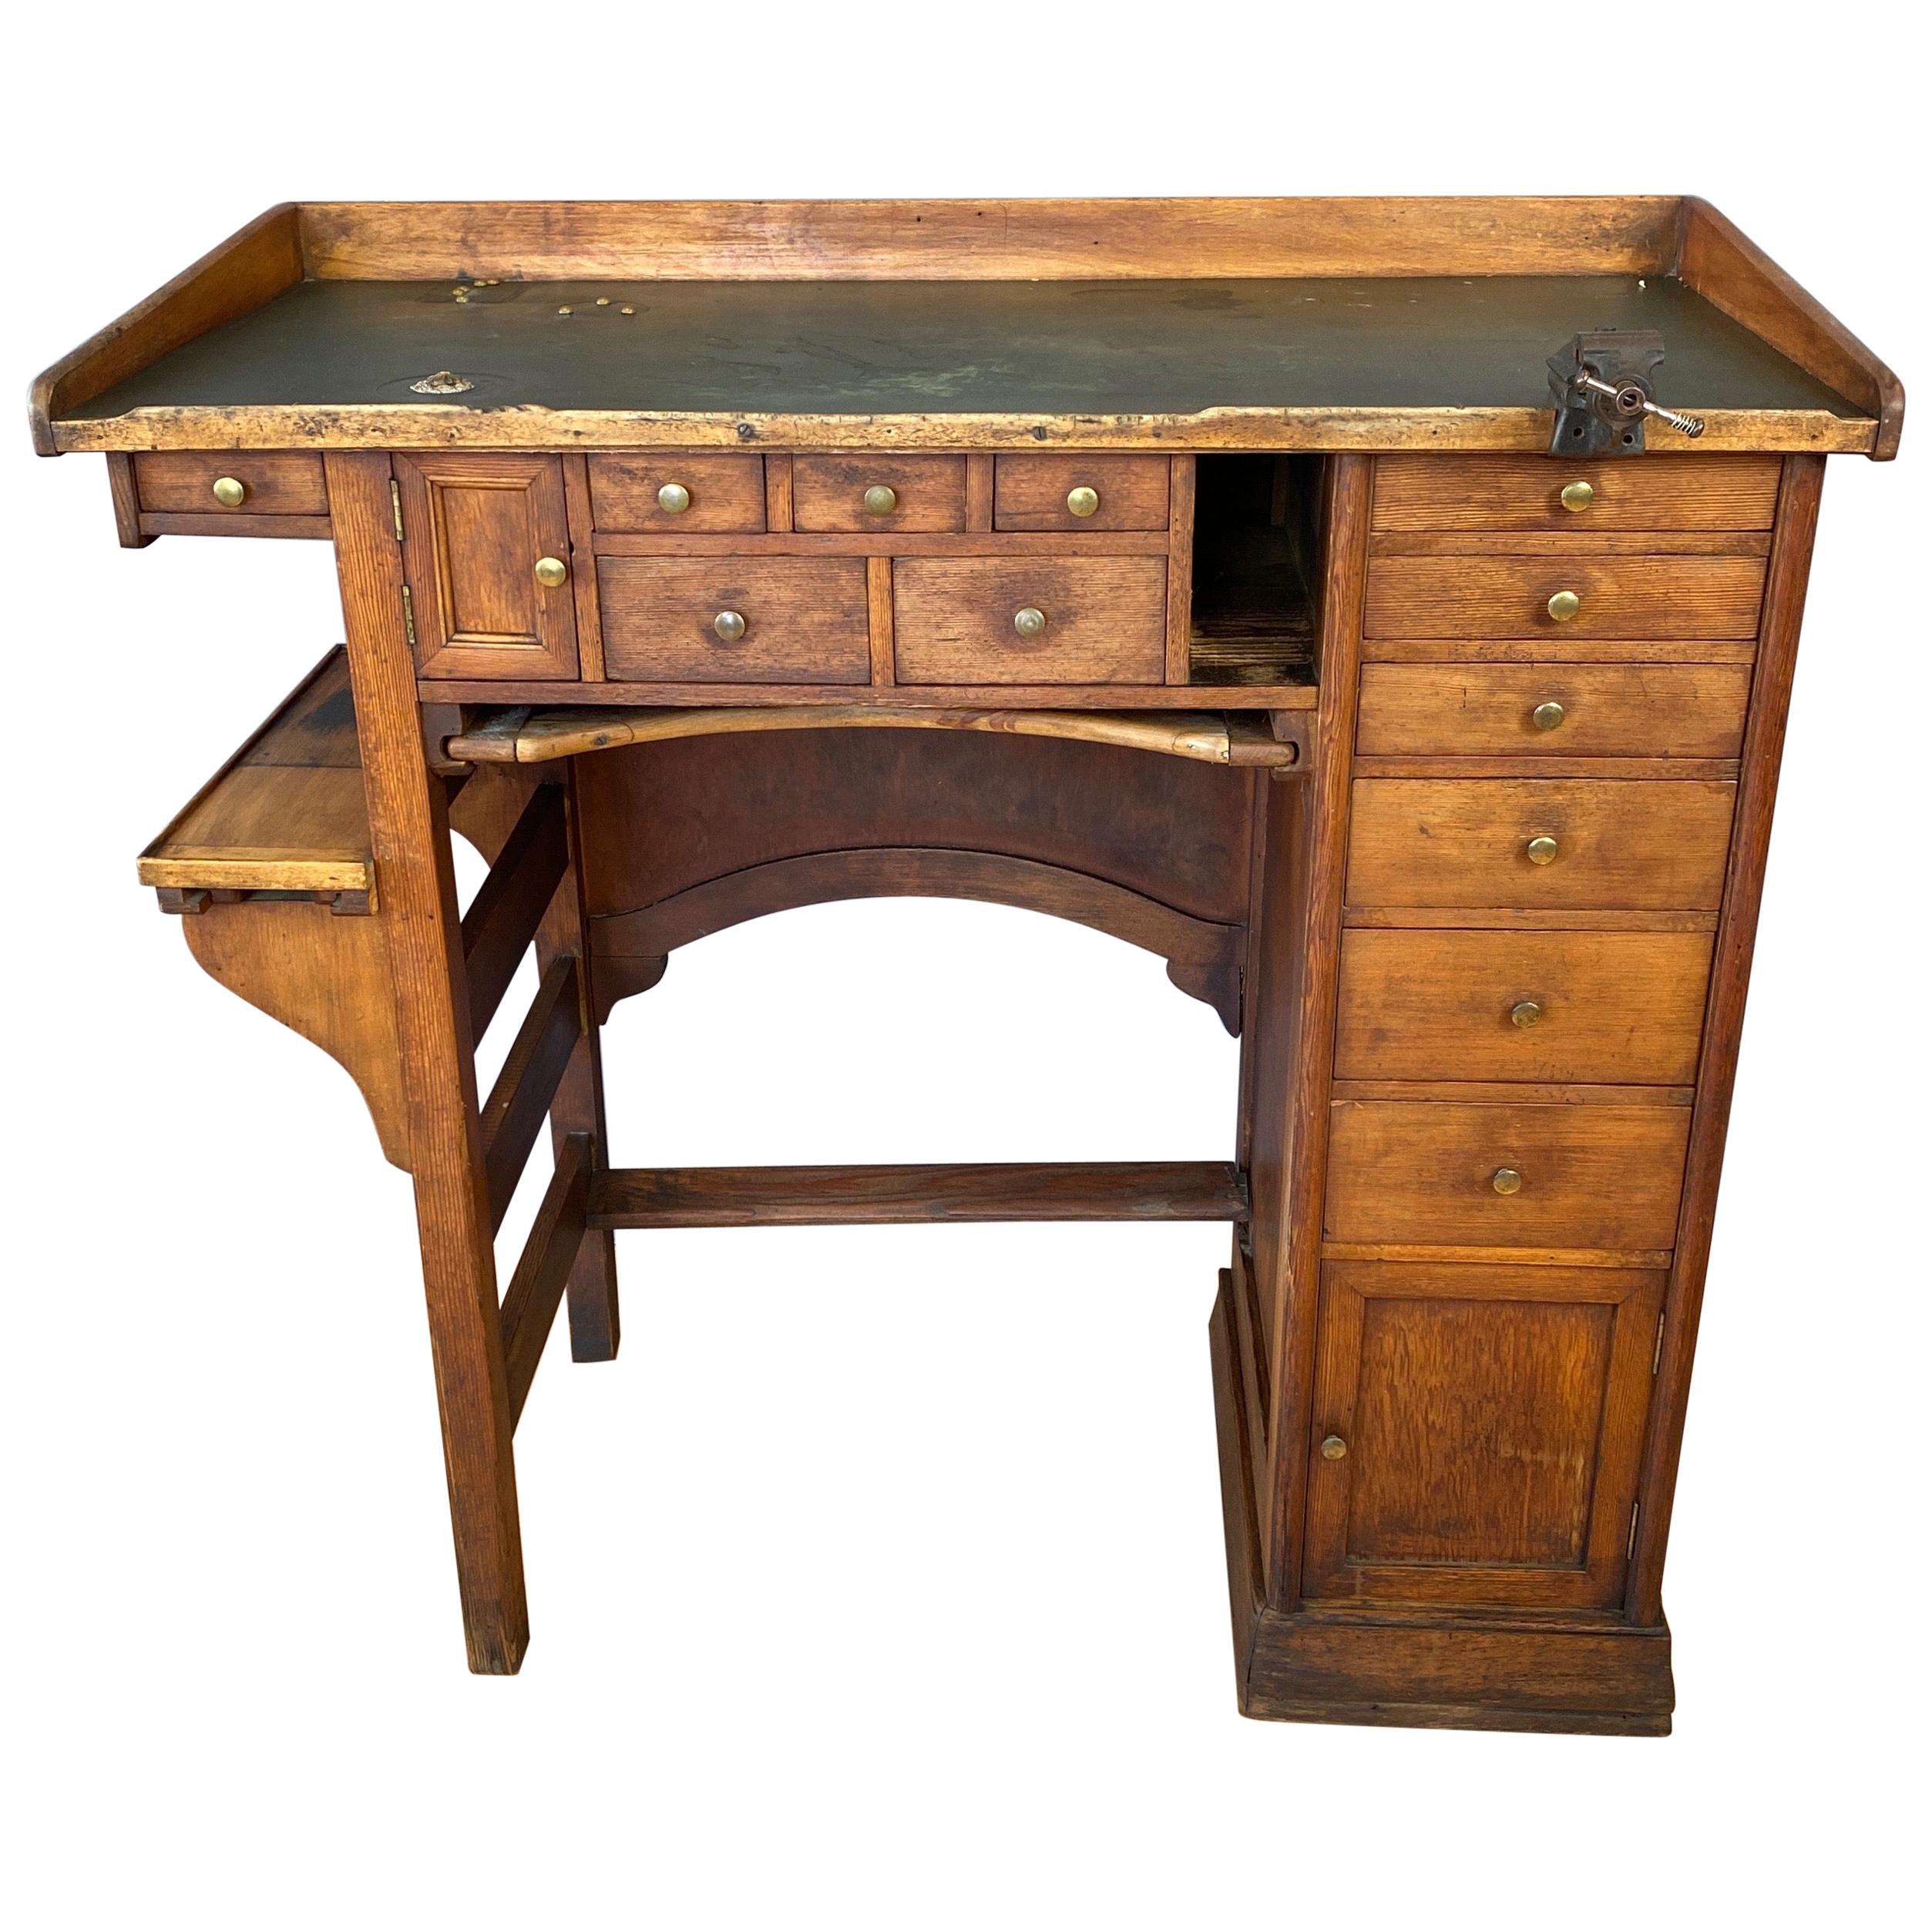 Antique Watchmaker’s or Jeweler’s Workbench or Tall Desk, 1920s